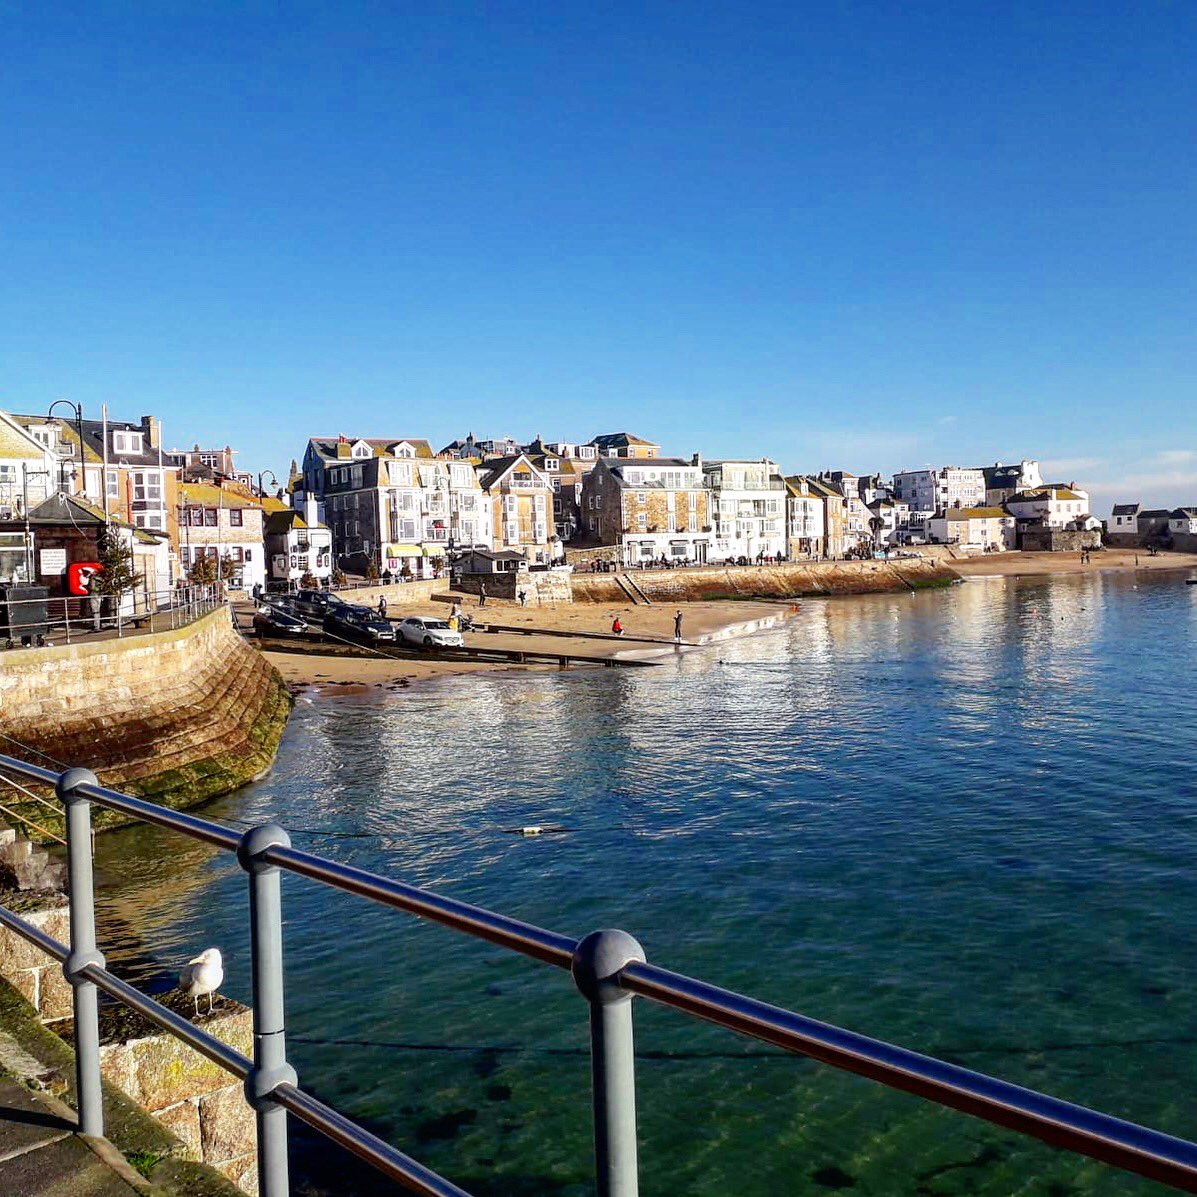 This beautiful picture of St Ives harbour was taken yesterday, St Ives looks just stunning in the winter sun 🌞 @sostives #getaway #stives #visitcornwall #winterbreaks #cornwall #holidaycottages #holidaylettings